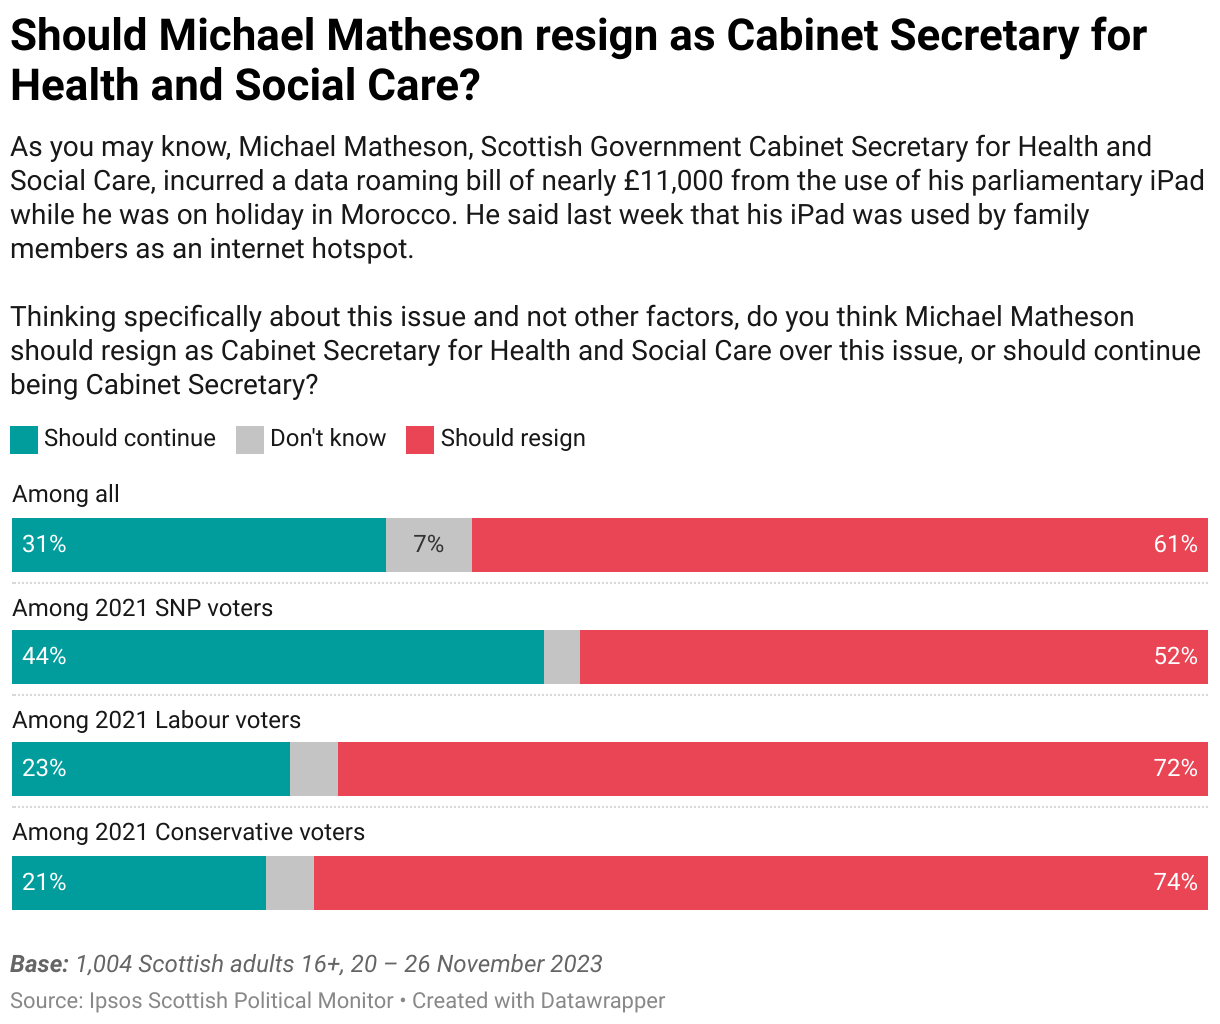 As you may know, Michael Matheson, Scottish Government Cabinet Secretary for Health and Social Care, incurred a data roaming bill of nearly £11,000 from the use of his parliamentary iPad while he was on holiday in Morocco. He said last week that his iPad was used by family members as an internet hotspot. 
Thinking specifically about this issue and not other factors, do you think Michael Matheson should resign as Cabinet Secretary for Health and Social Care over this issue, or should continue being Cabinet Secretary? % Should Resign
Among all: 61%
Among 2021 SNP voters: 52%
Among 2021 Labour voters: 72%
Among 2021 Conservative voters: 74%
Base: 1,004 Scottish adults 16+, 20 – 26 November 2023